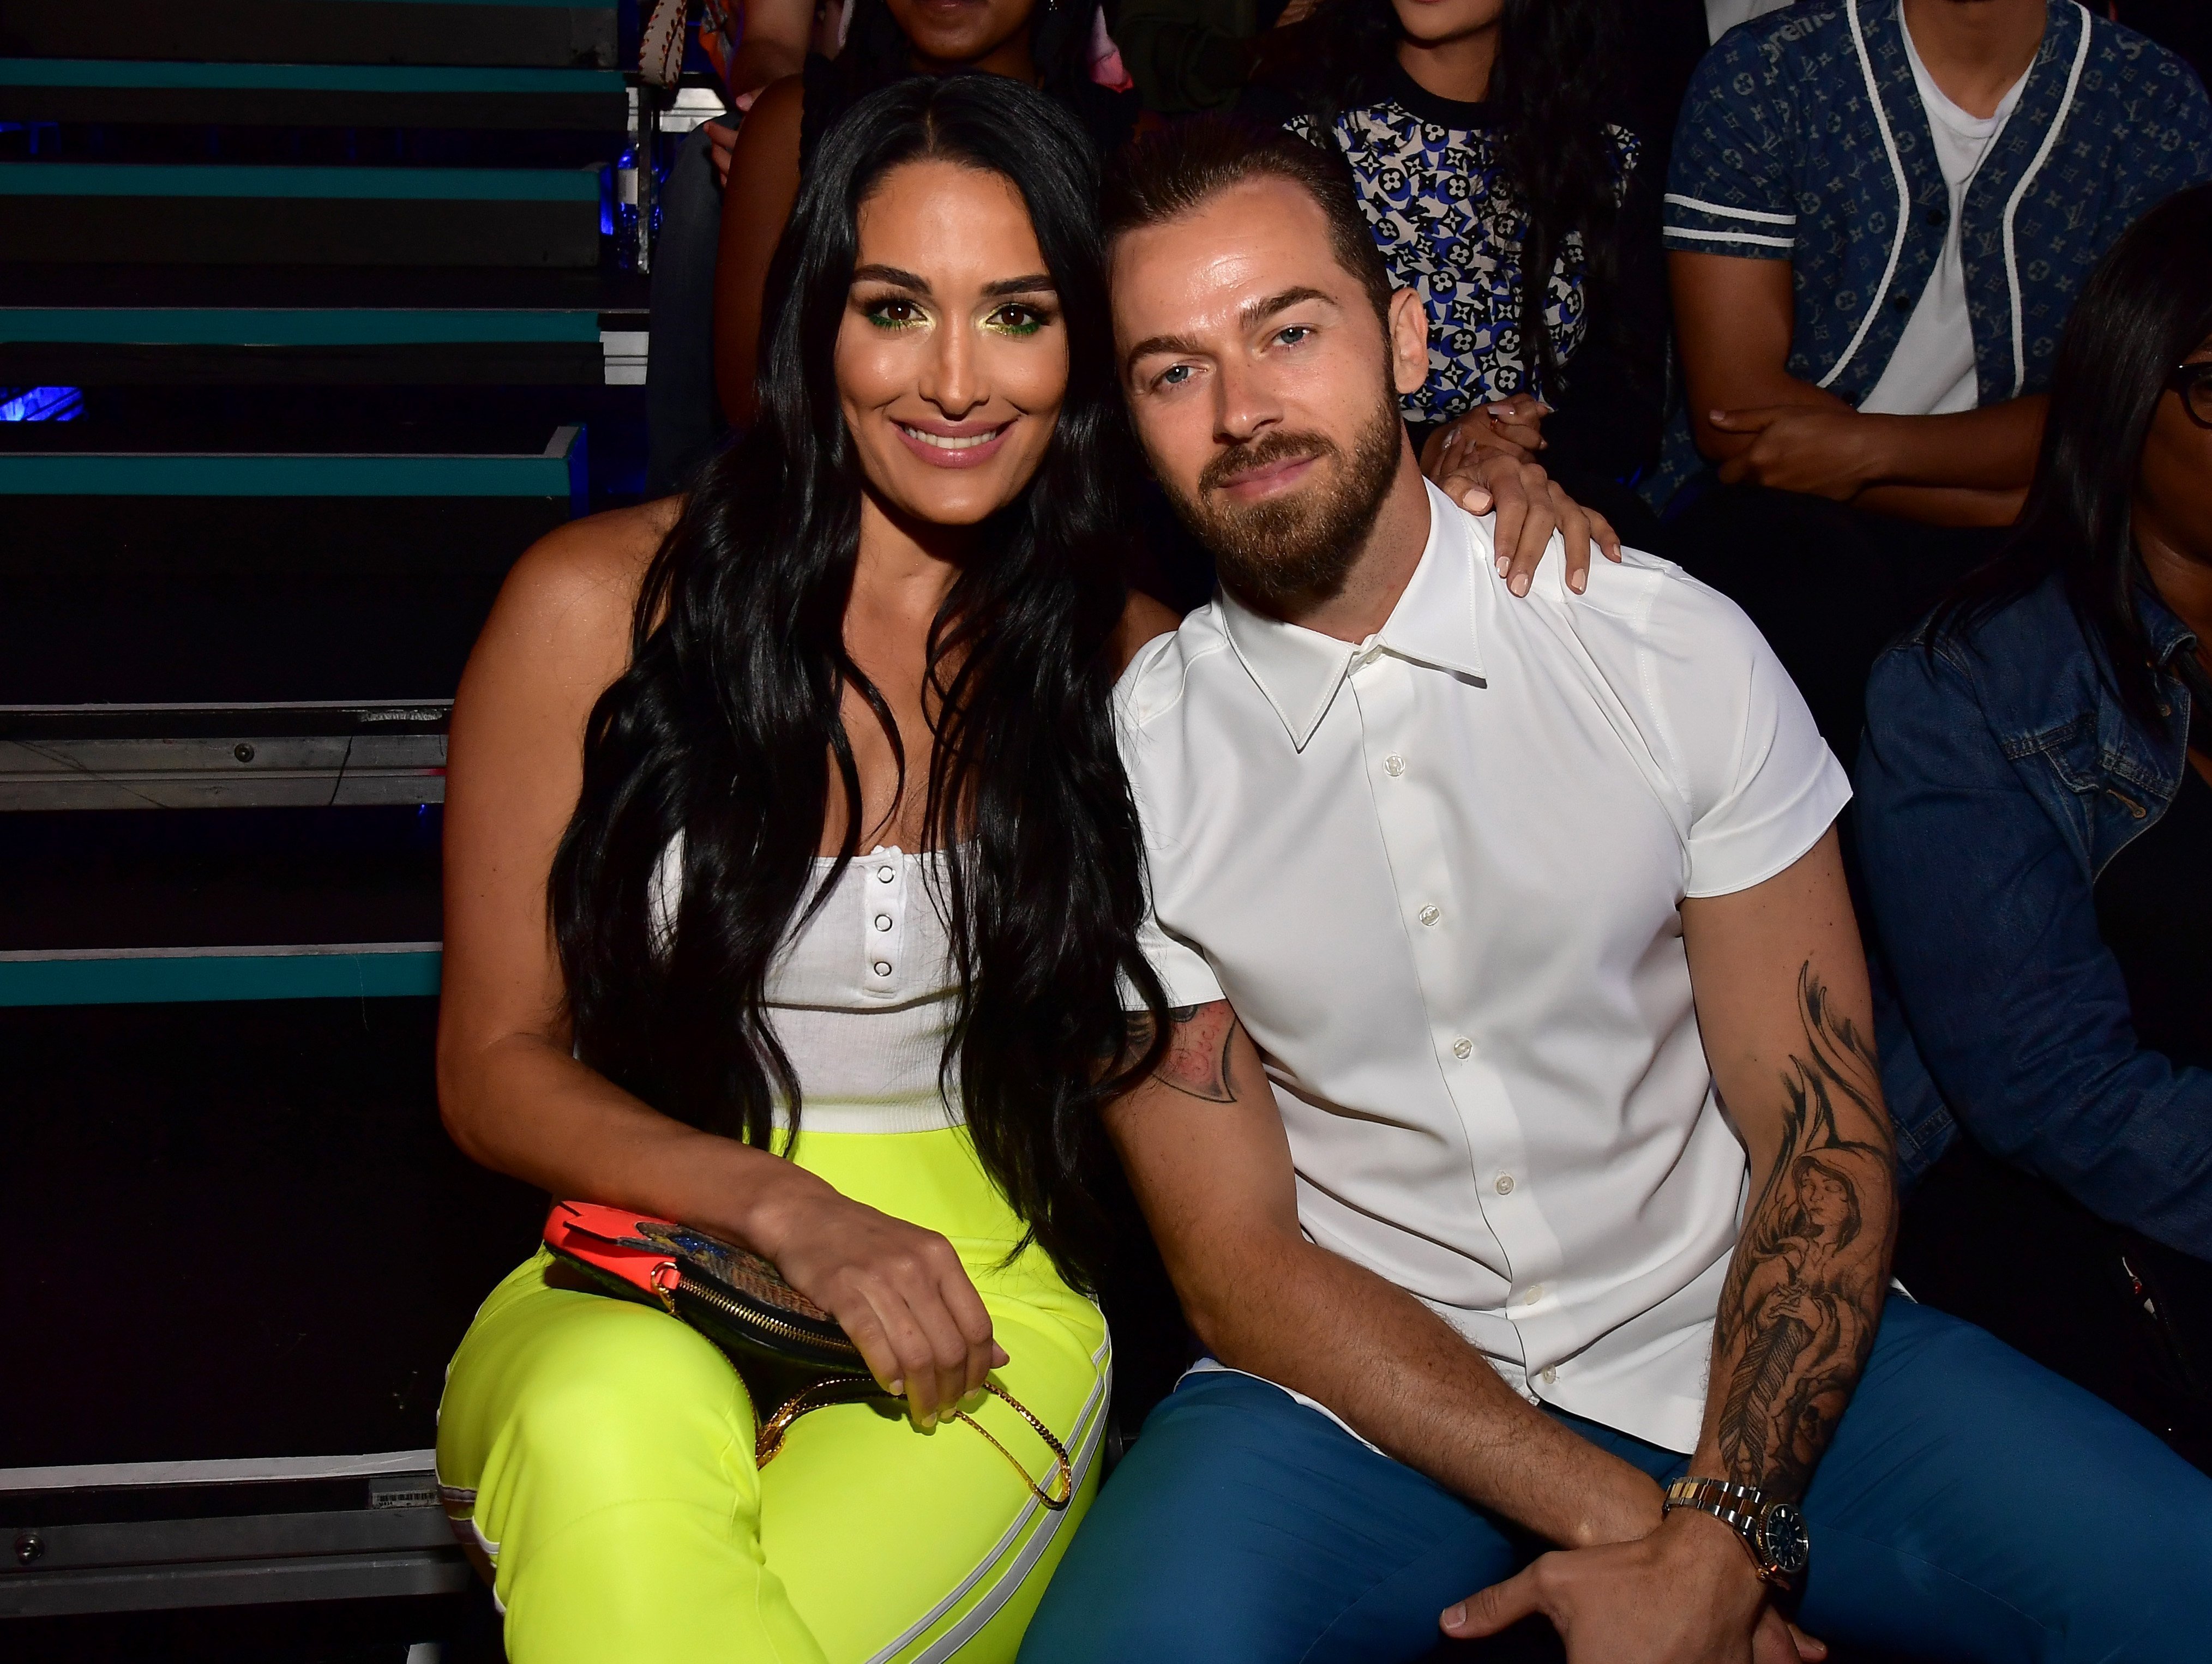 Nikki Bella and Artem Chigvintsev during Nickelodeon Kids' Choice Sports 2019 at Barker Hangar on July 11, 2019 in Santa Monica, California. | Photo: Getty Images